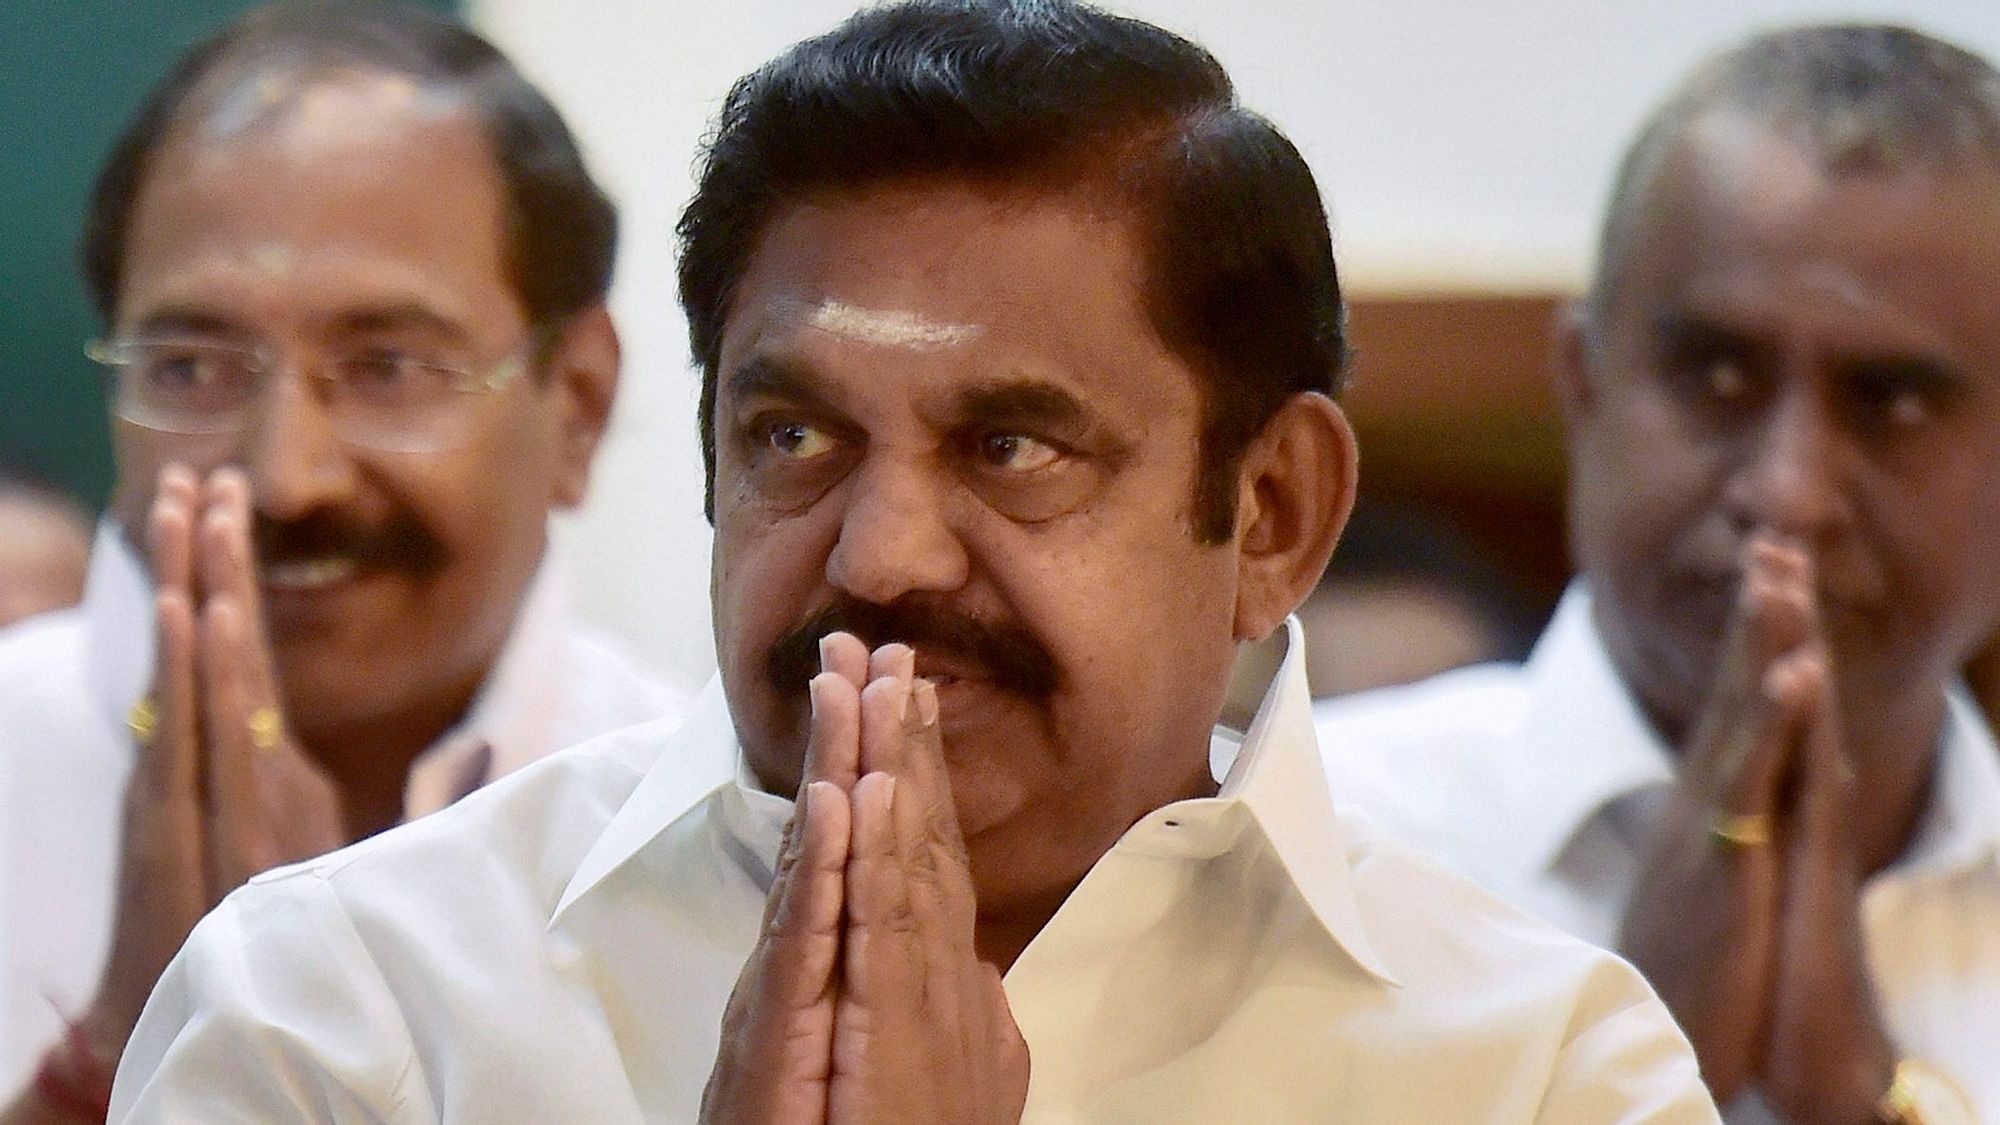 Tamil Nadu CM said the state would be losing about Rs 35,000 crore tax revenue due to the COVID-19 induced lockdown.